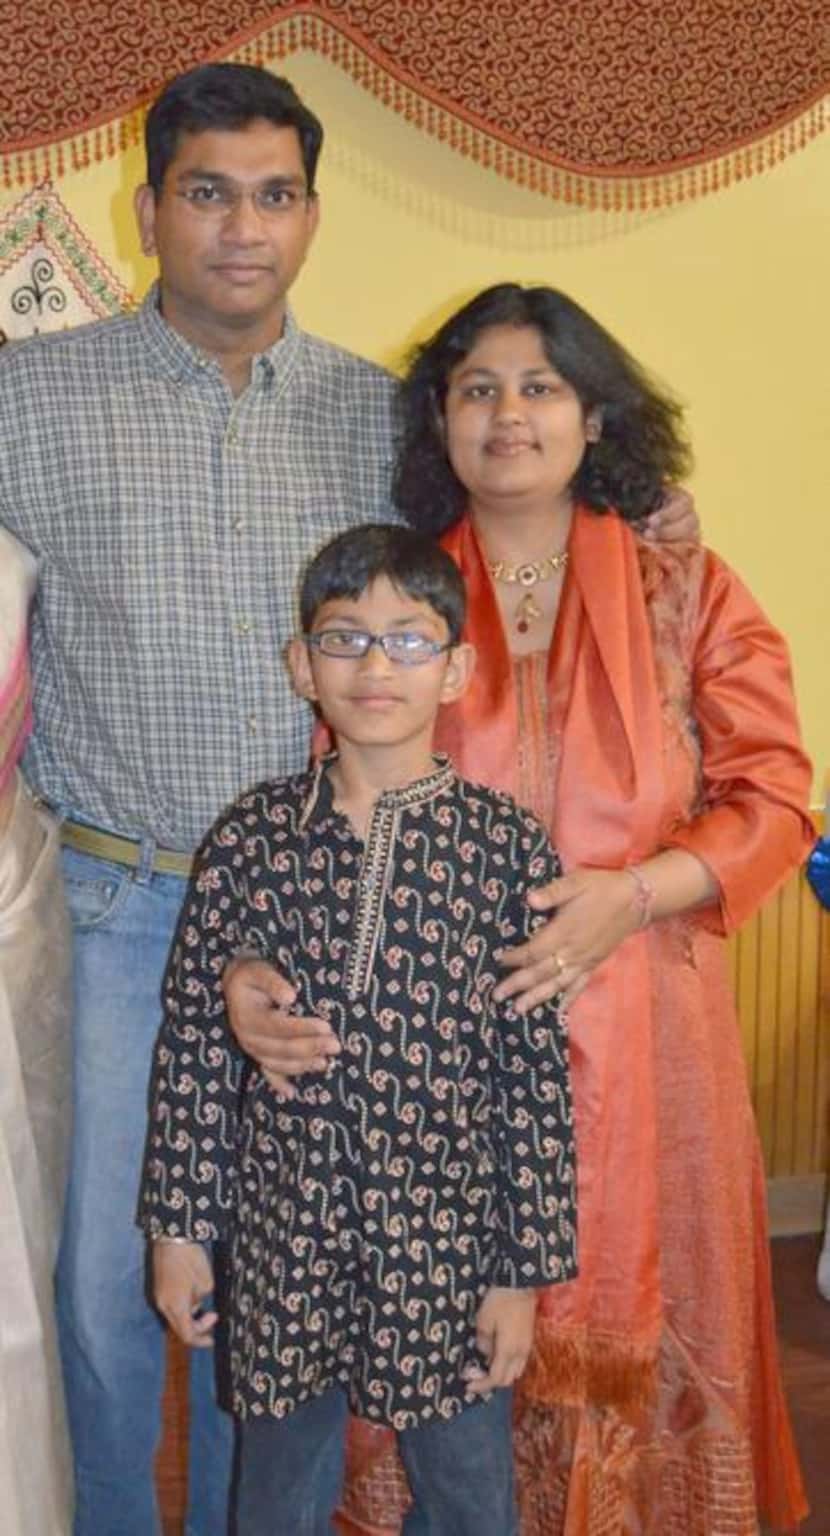 
Pallavi Dhawan, shown with son Arnav and husband Sumeet, was accused in the 10-year-old’s...